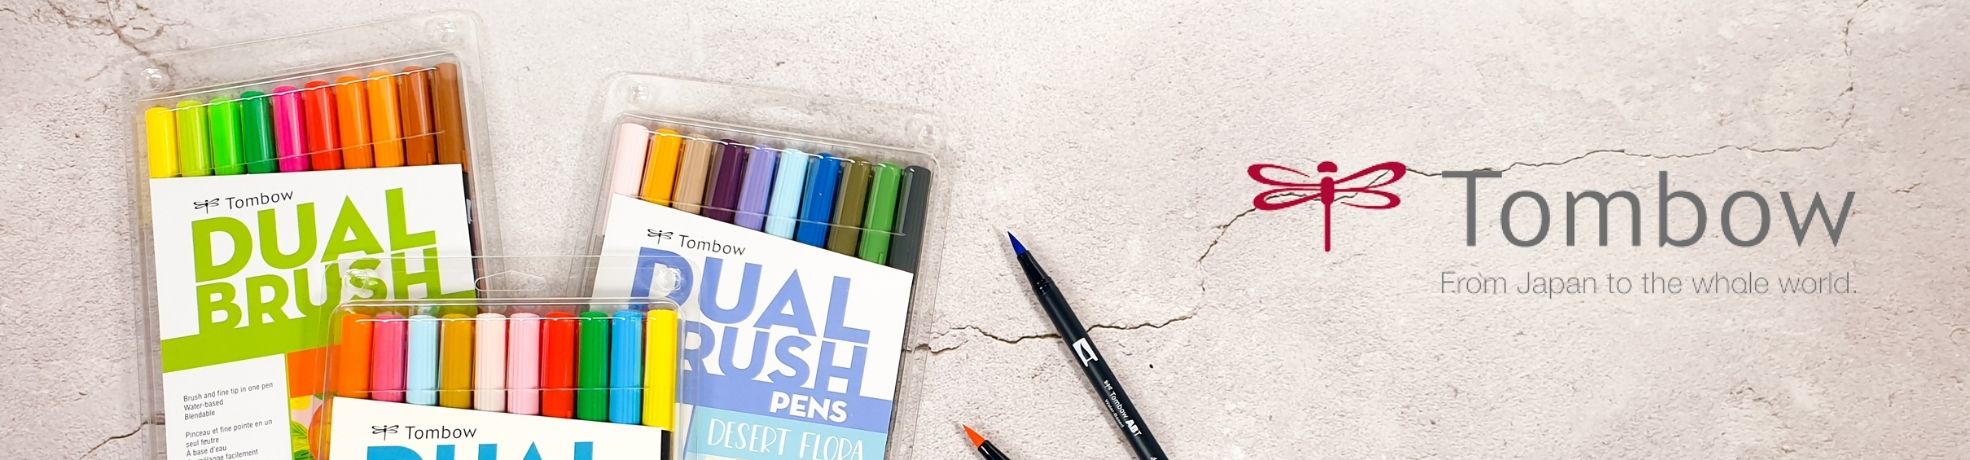 Tombow Brush Pens for Brush Lettering Collection - Paper Kooka